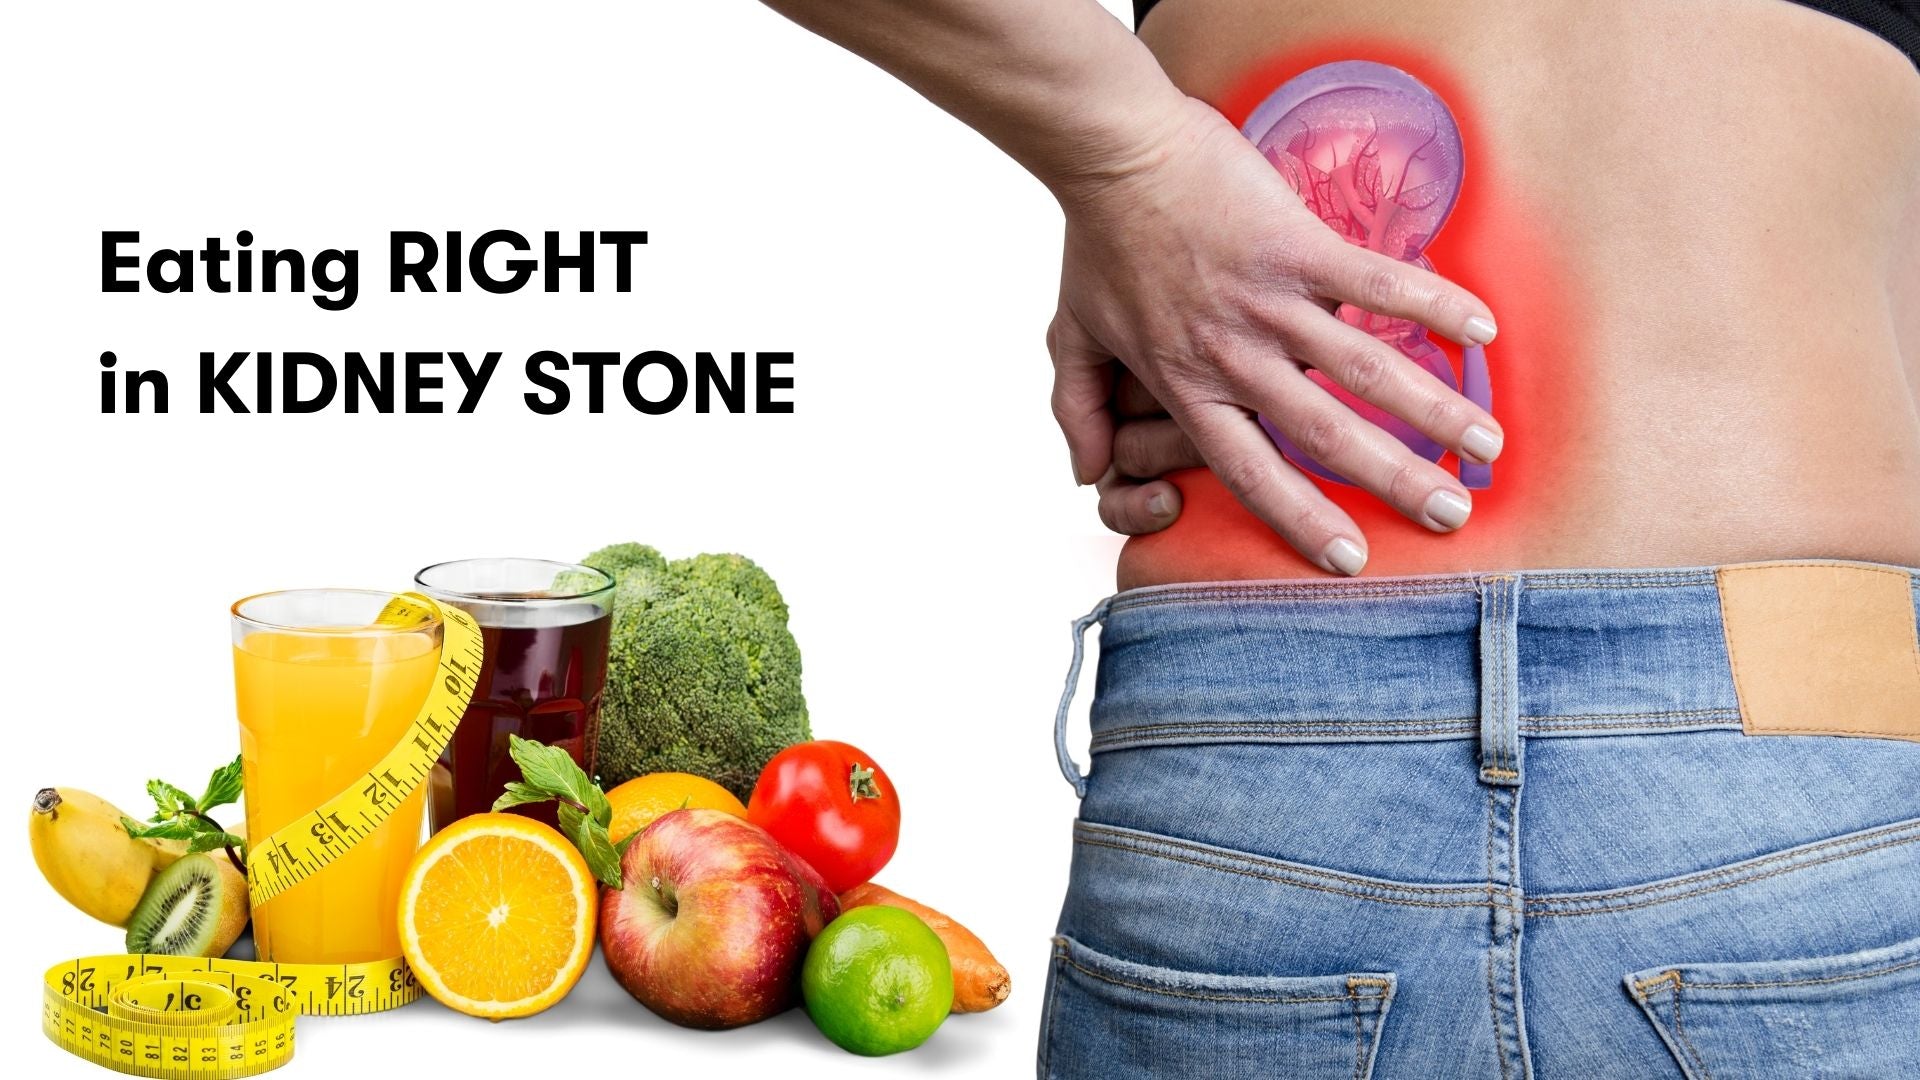 Kidney Stone Diet: What to eat and what to avoid?